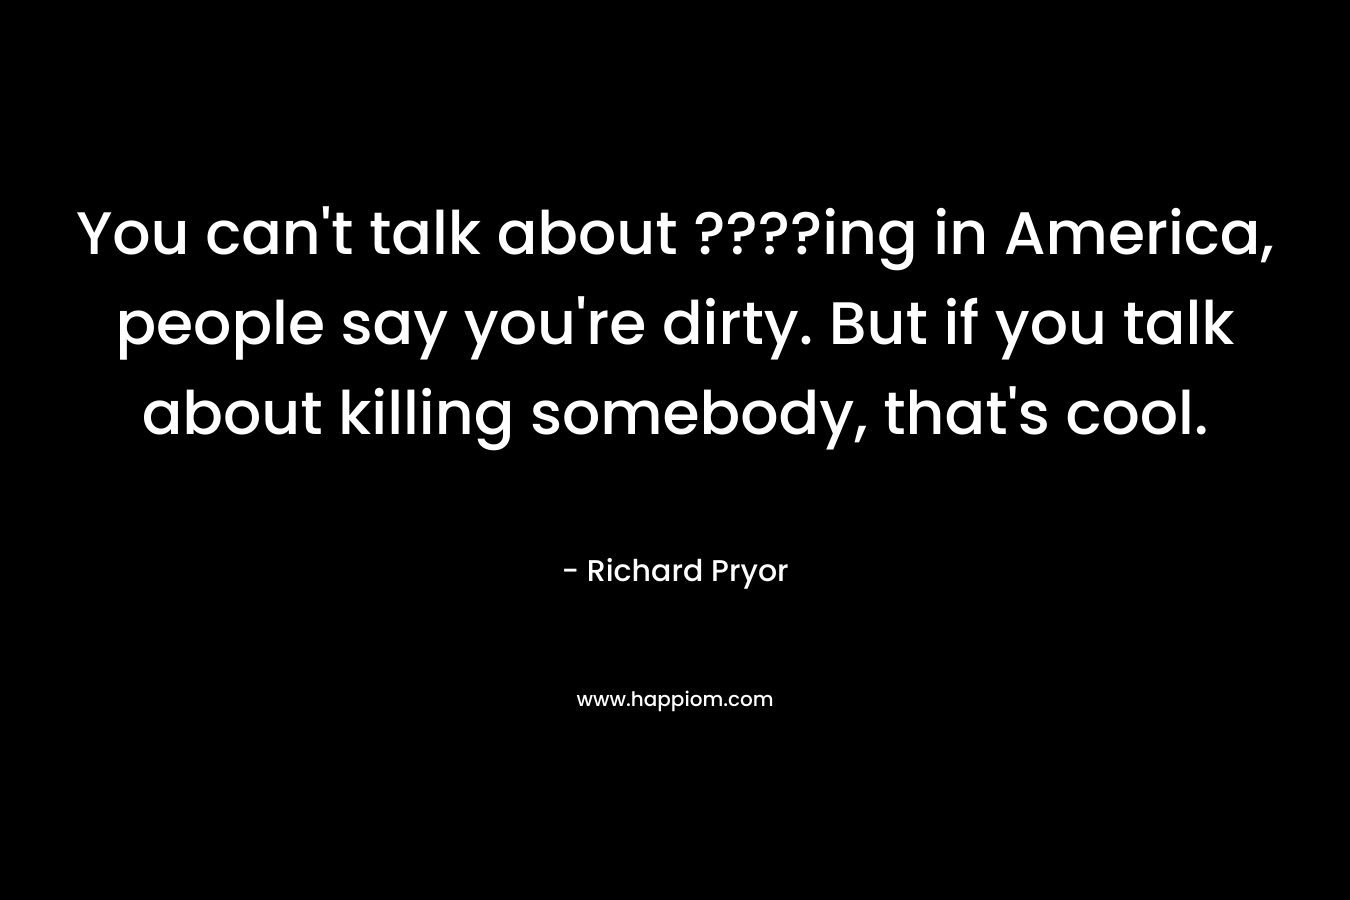 You can't talk about ????ing in America, people say you're dirty. But if you talk about killing somebody, that's cool.